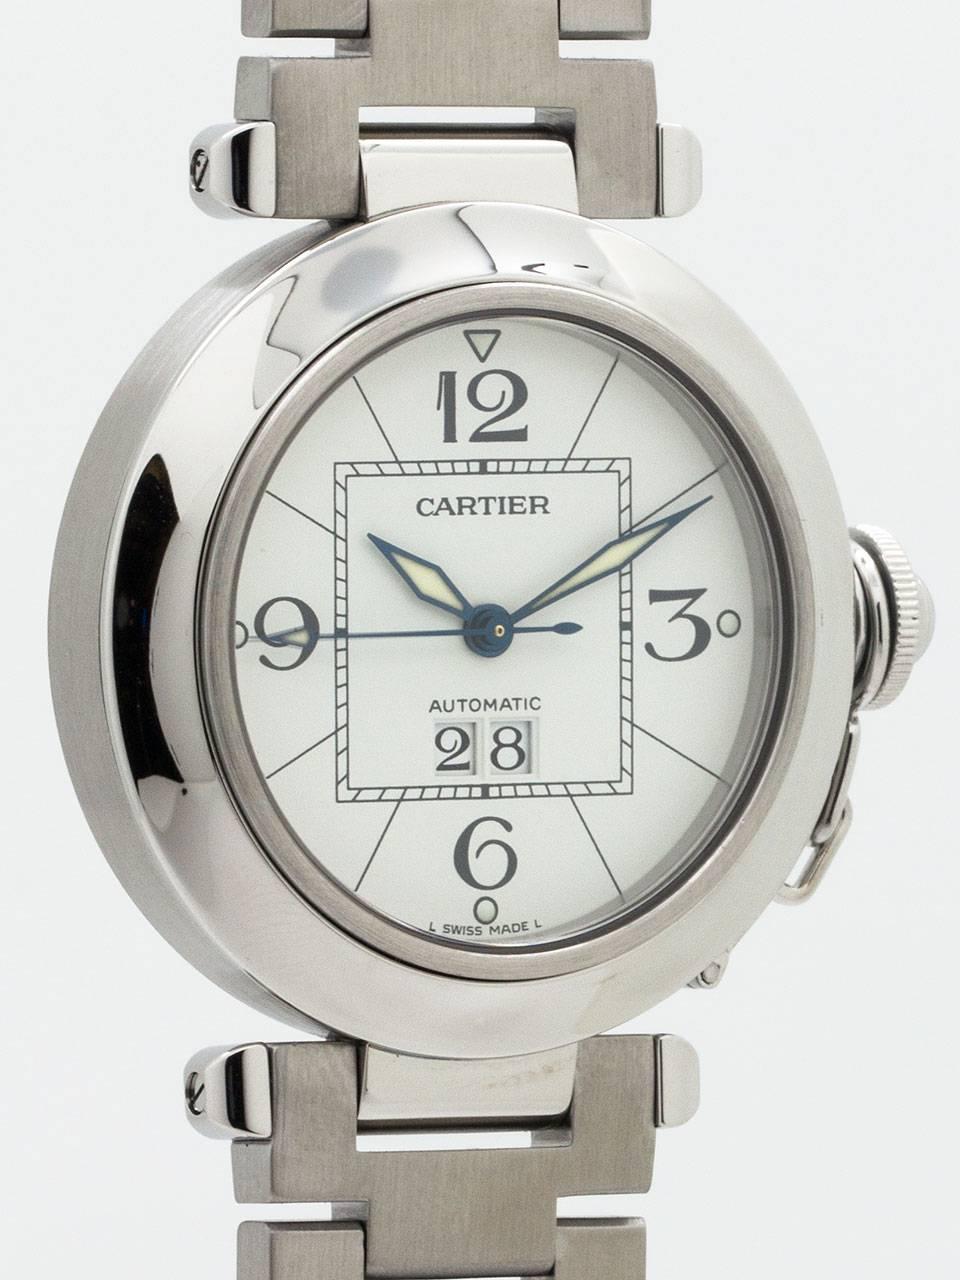 Cartier Stainless Steel Pasha C ref 2475 circa 2000s. 35.5 x 42 diameter case with smooth bezel, sapphire crystal and stainless steel screw down canteen style crown protector. Featuring original white dial with large black Arabic numerals and